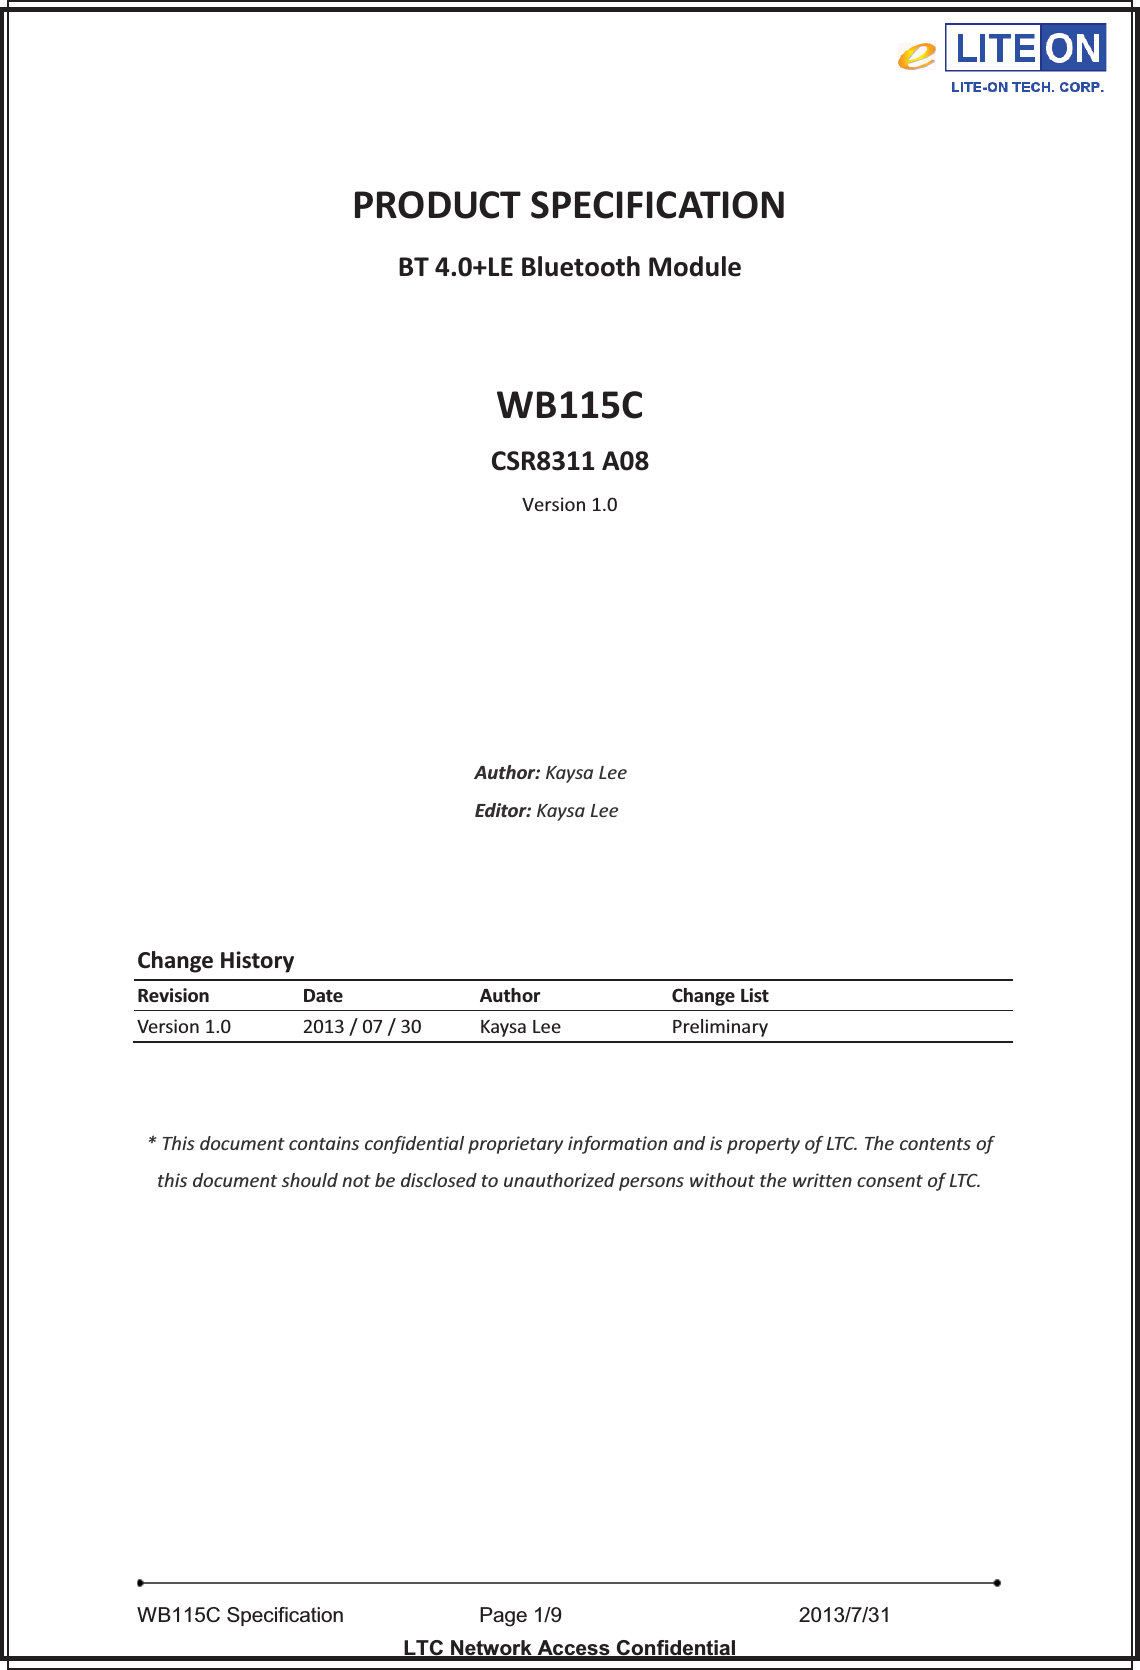   WB115C Specification        Page 1/9                  2013/7/31  LTC Network Access Confidential  PRODUCT SPECIFICATION BT 4.0+LE Bluetooth Module  WB115C CSR8311 A08 Version 1.0       Author: Kaysa Lee Editor: Kaysa Lee    Change History Revision Date Author Change List Version 1.0 2013 / 07 / 30 Kaysa Lee Preliminary   * This document contains confidential proprietary information and is property of LTC. The contents of this document should not be disclosed to unauthorized persons without the written consent of LTC.   